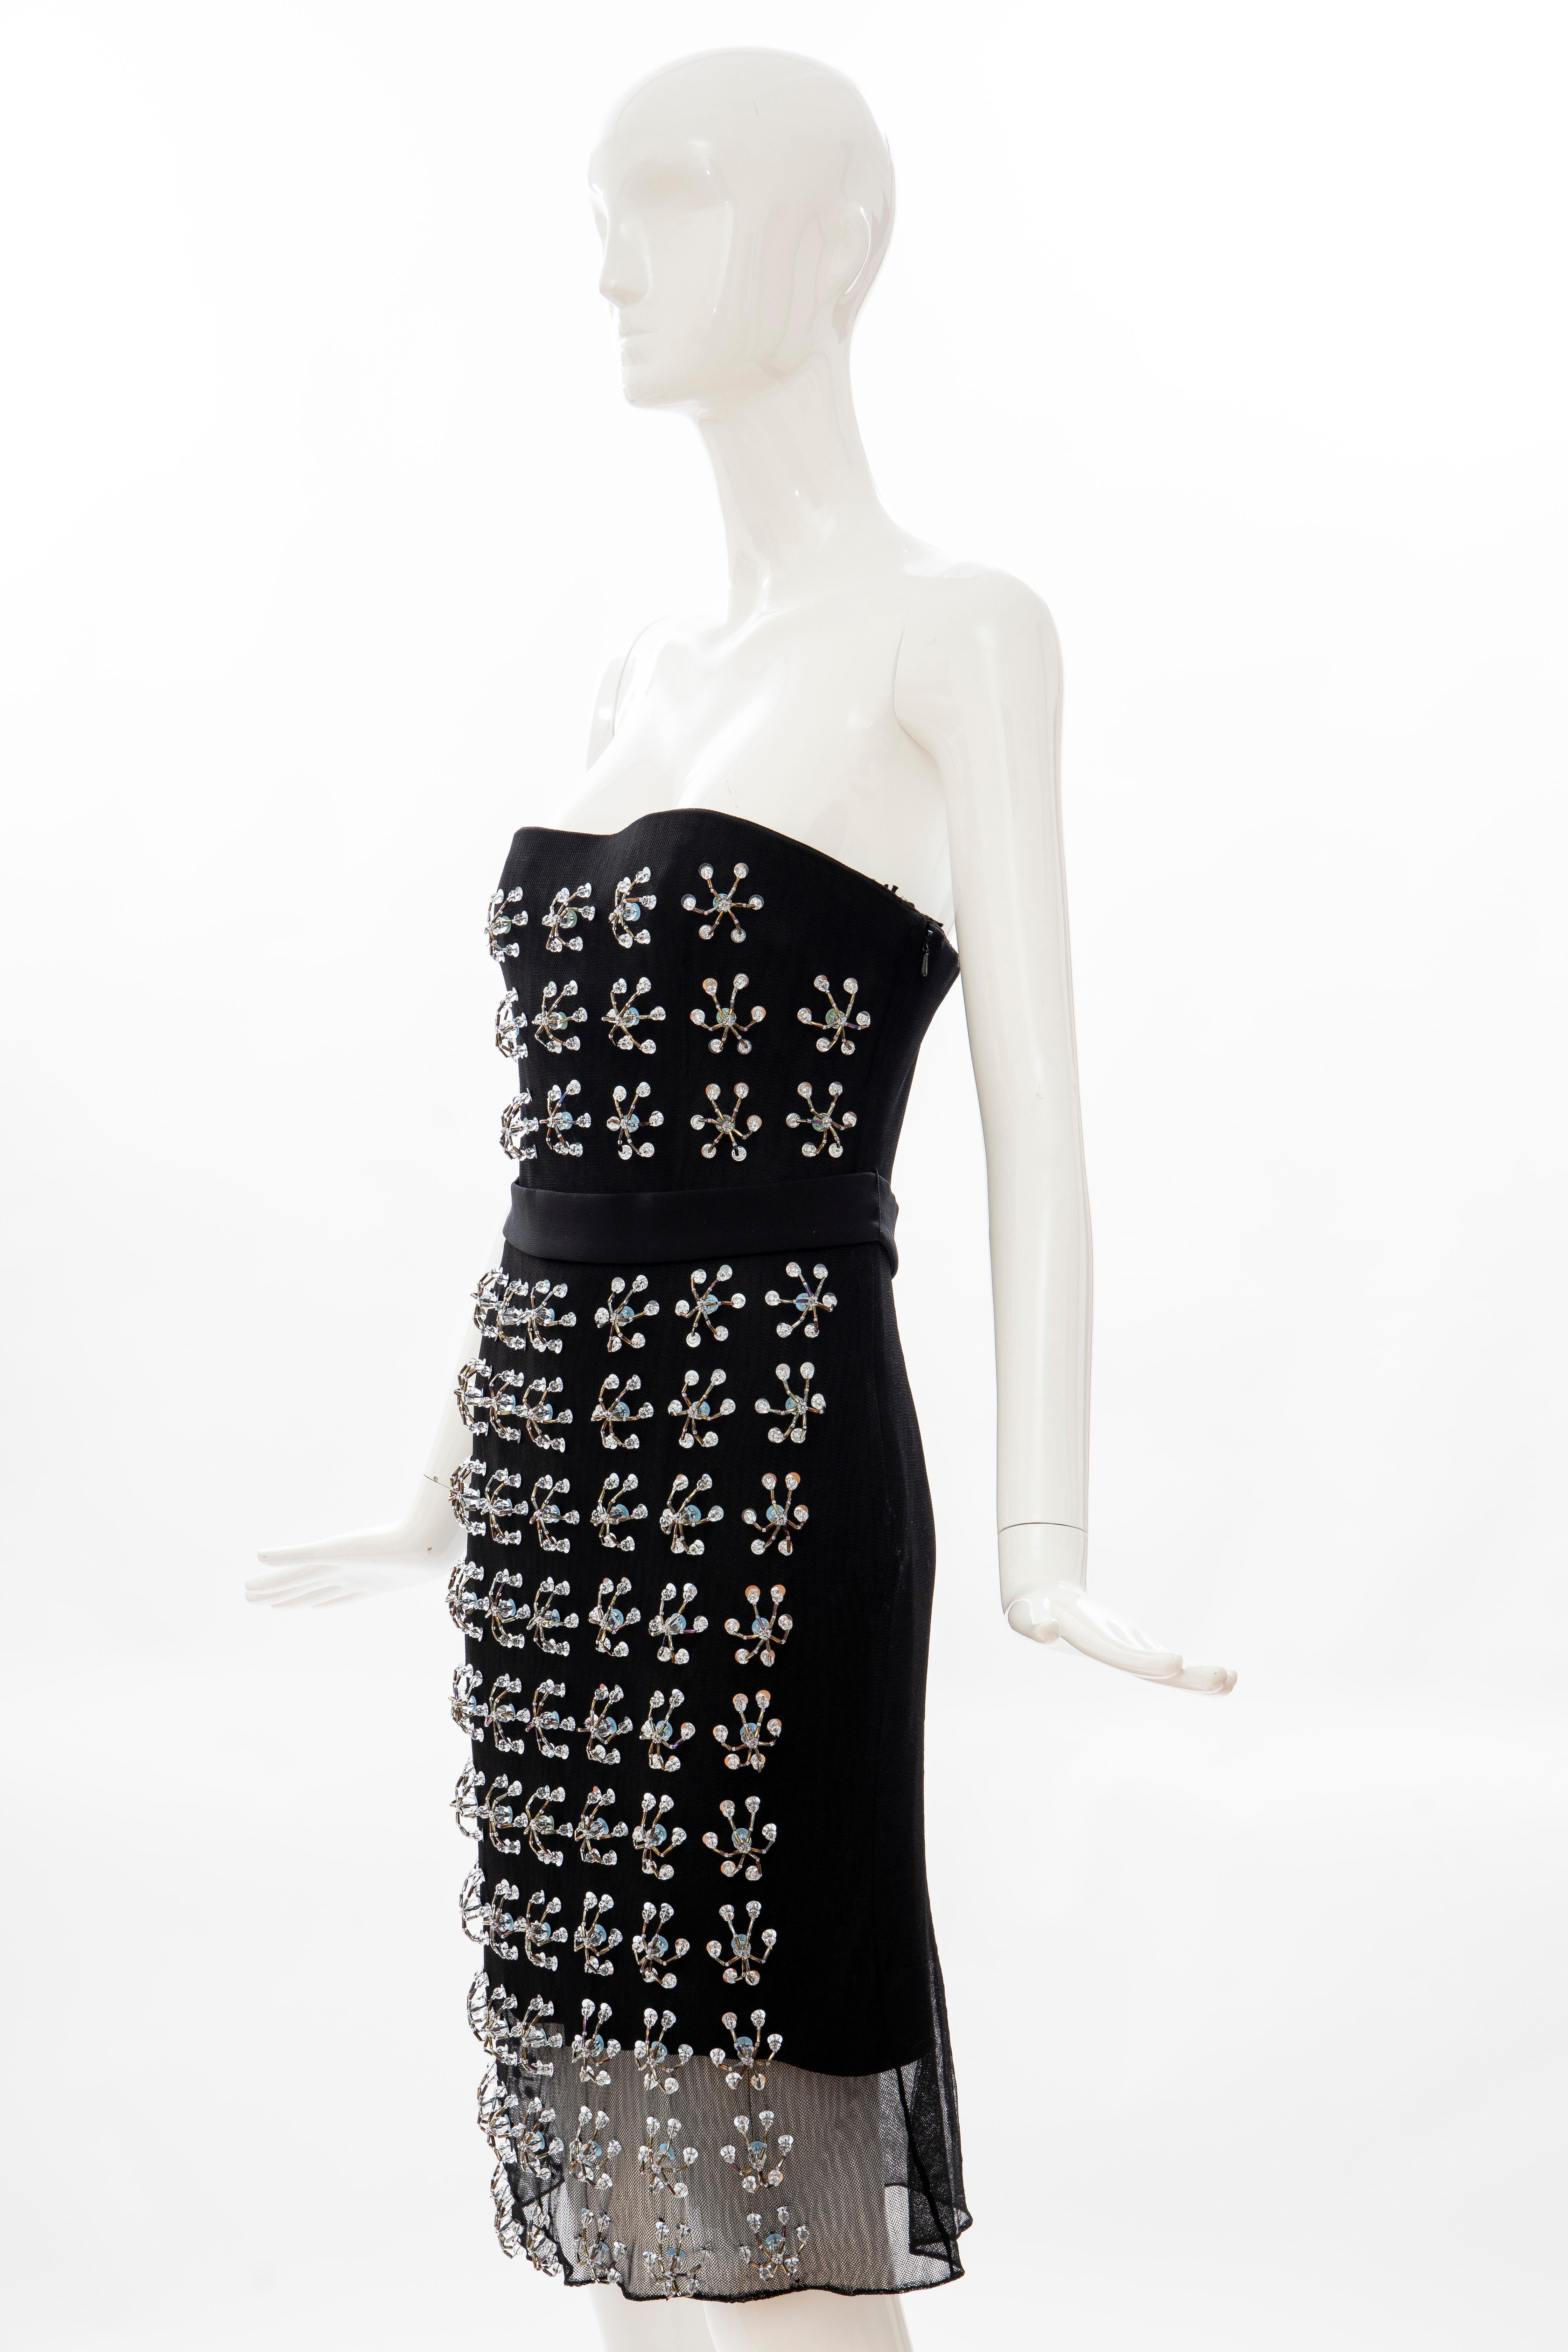 Women's Raf Simons for Christian Dior Runway Strapless Embroidered Dress, Spring 2013 For Sale